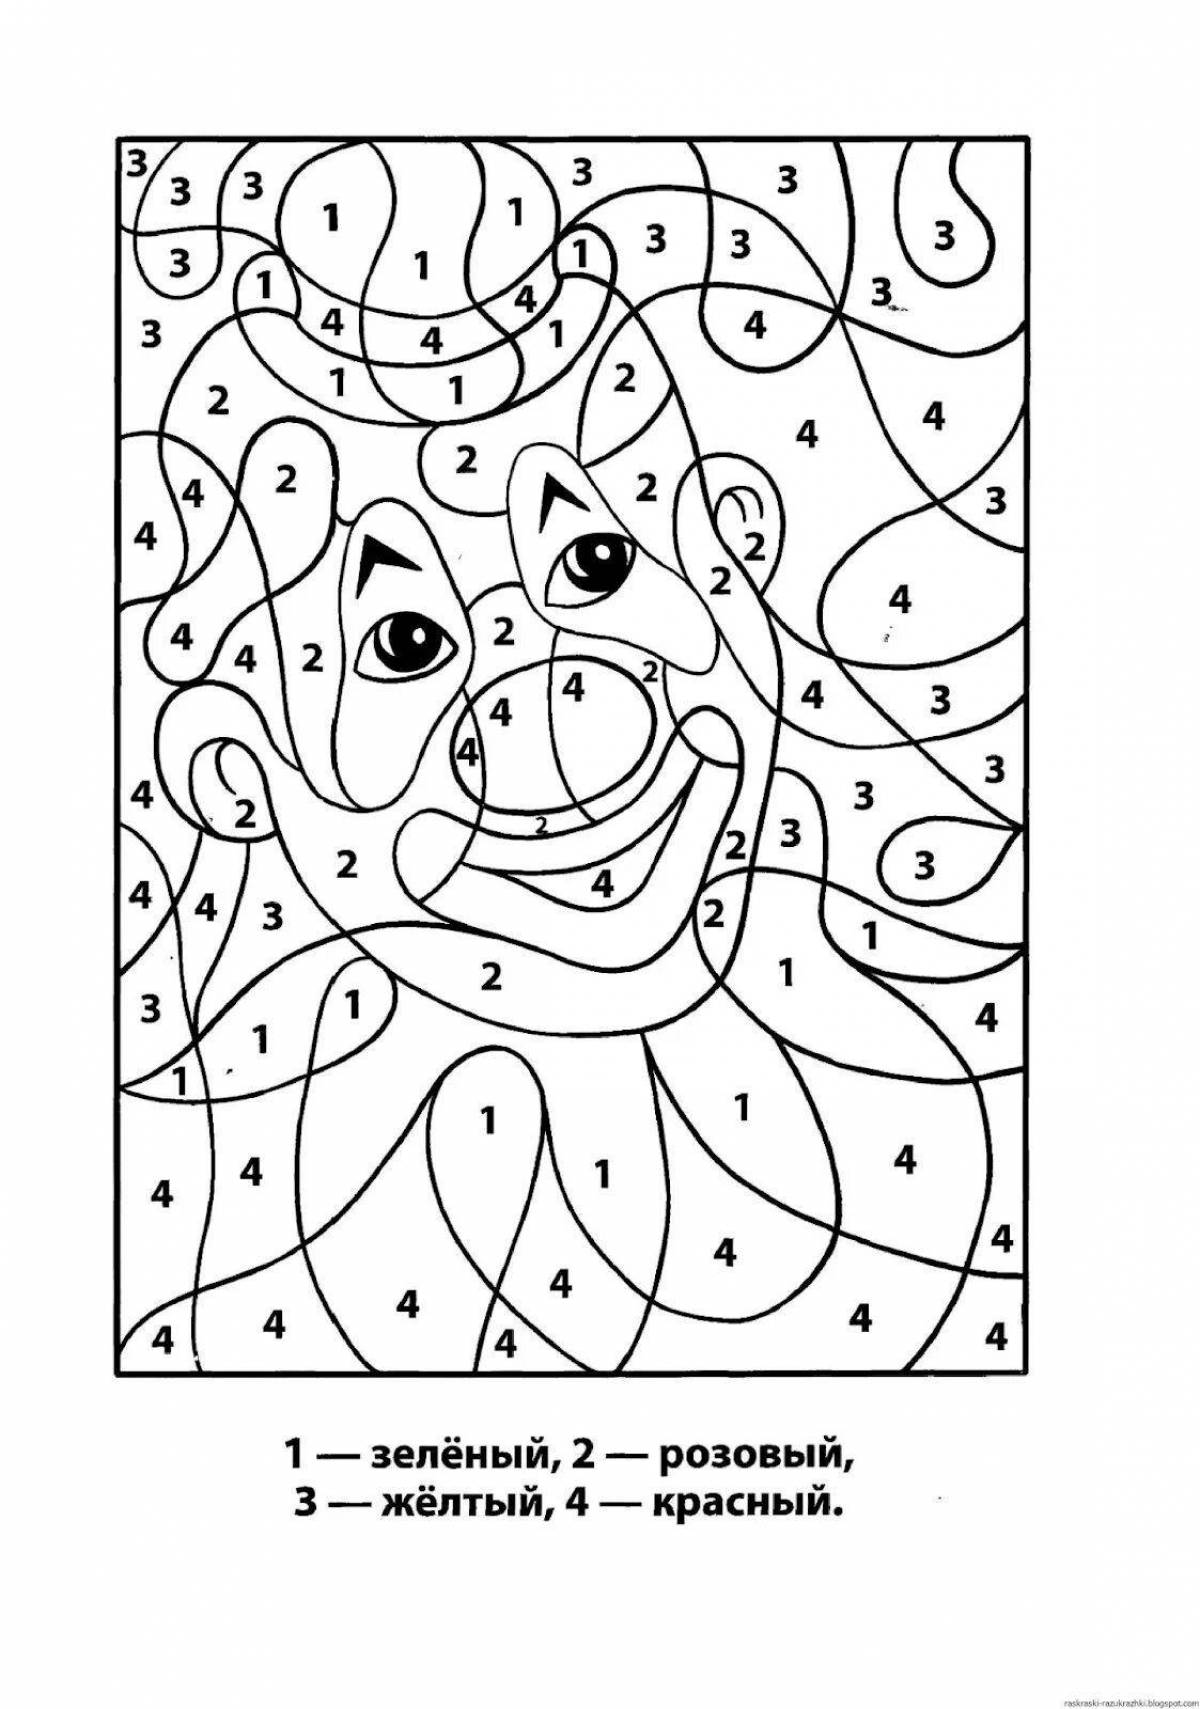 Amazing coloring book for 7-8 year olds